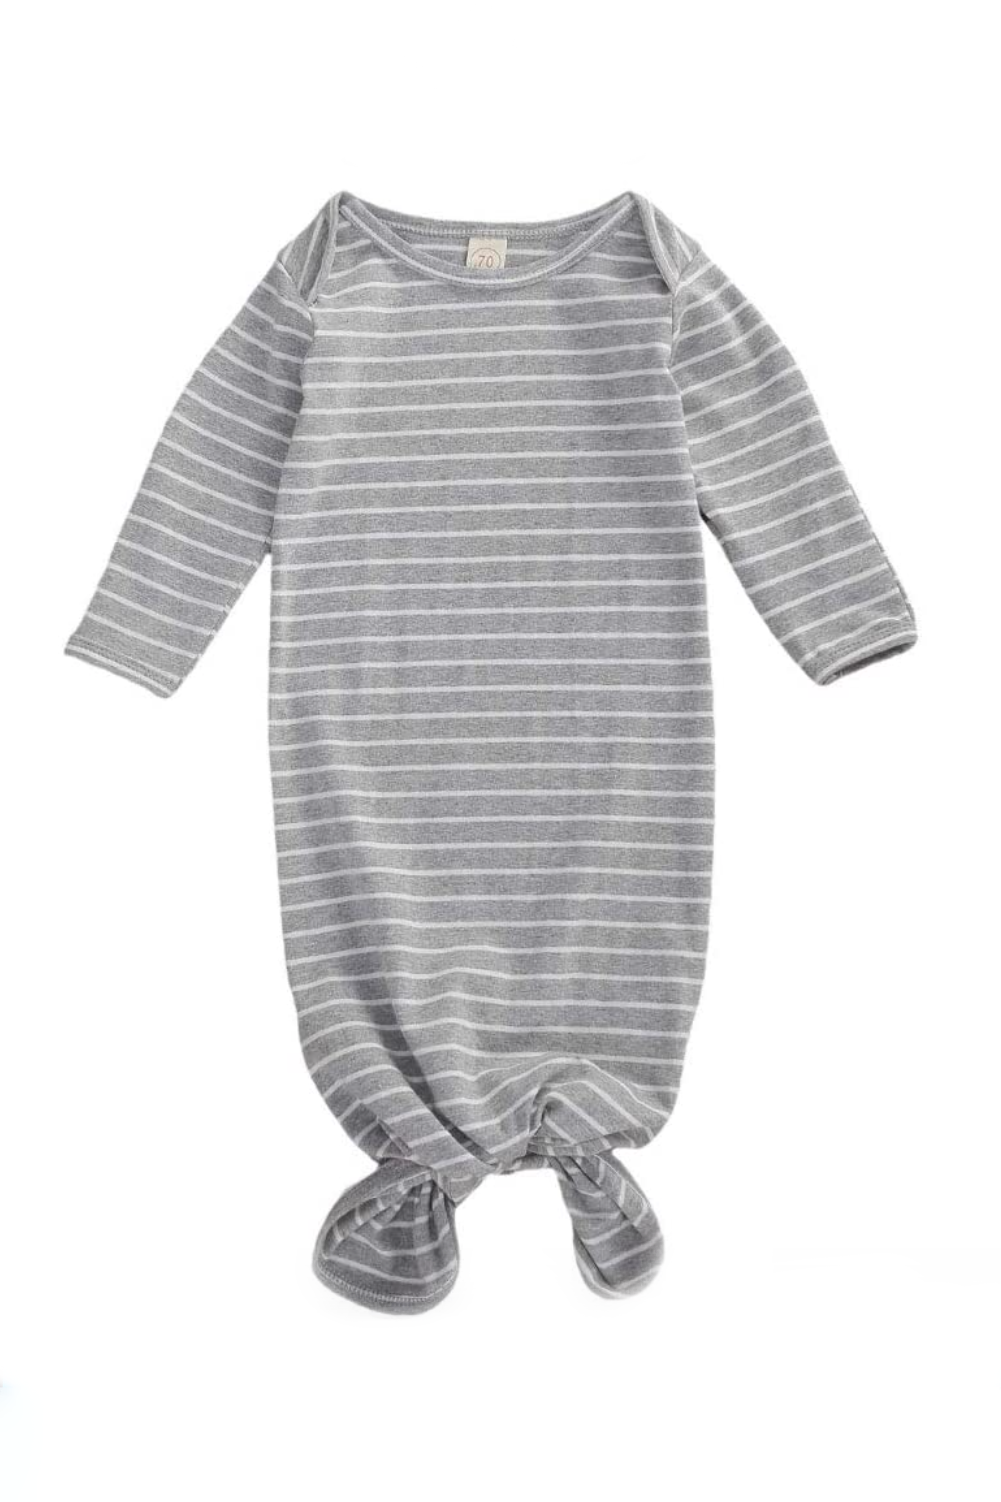 babeleven gray stripe baby gown newborn photographer.png